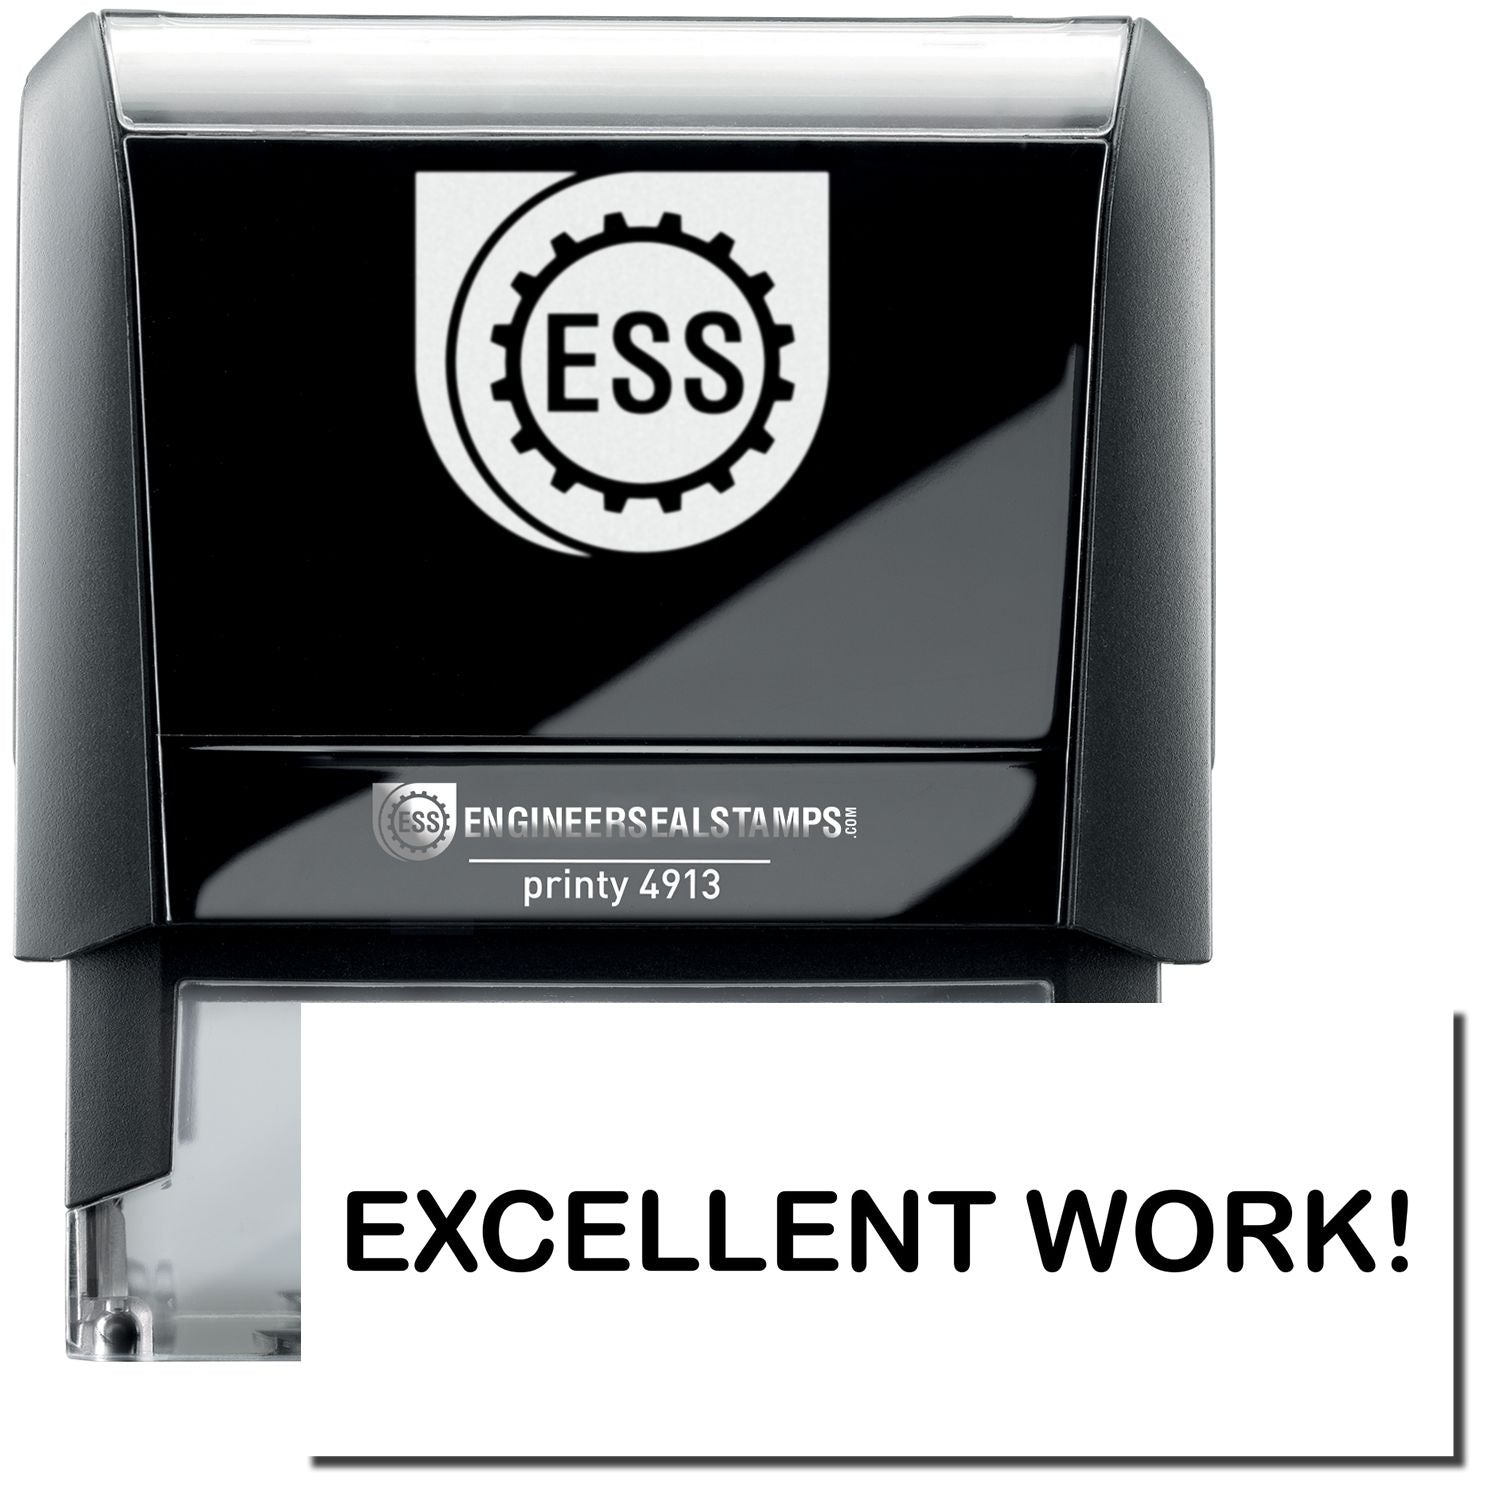 A self-inking stamp with a stamped image showing how the text "EXCELLENT WORK!" in a large bold font is displayed by it.